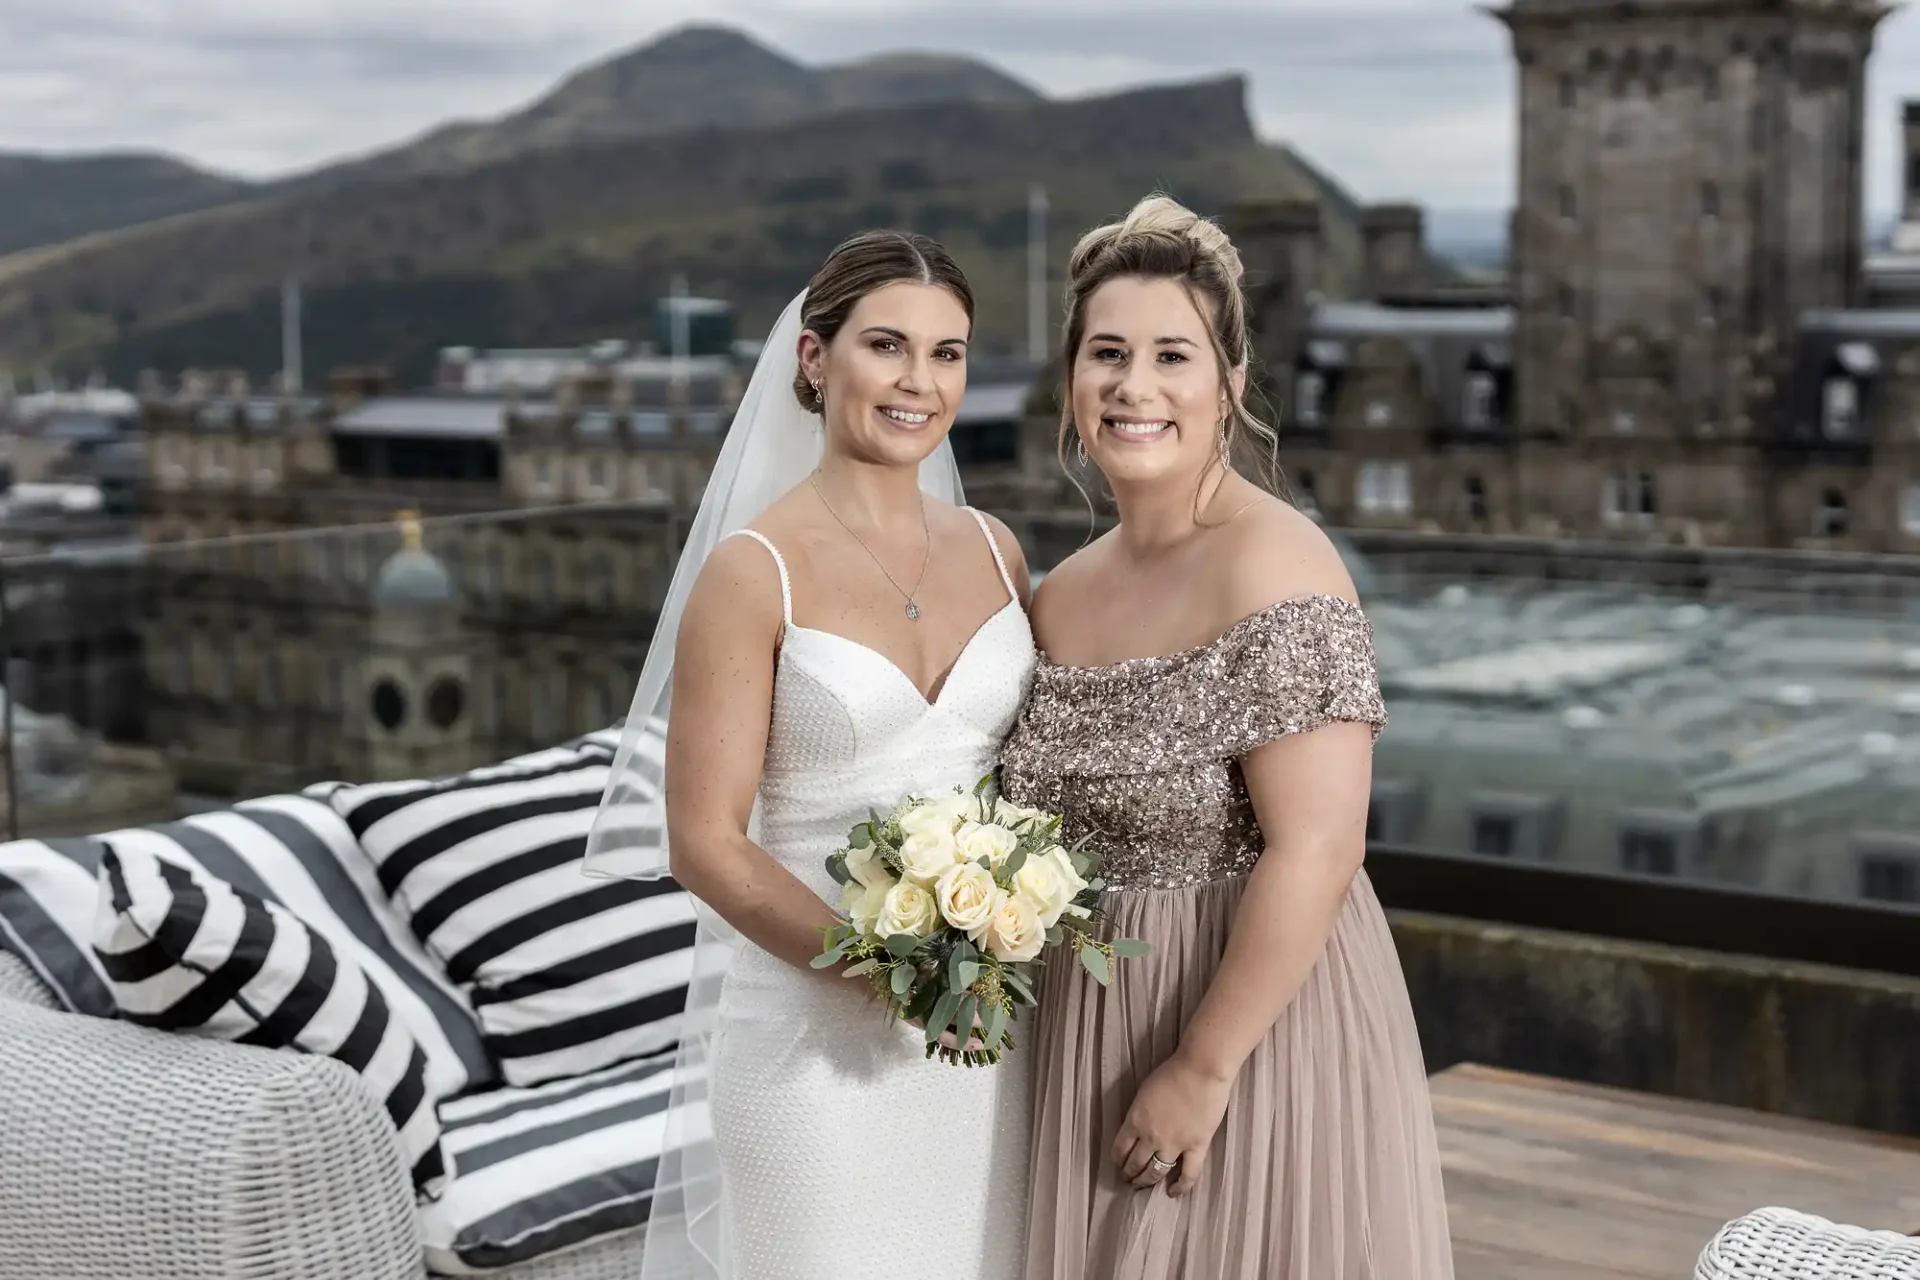 Two women smiling on a rooftop, one in a white wedding dress holding a bouquet and the other in a sequined beige dress, with city hills in the background.